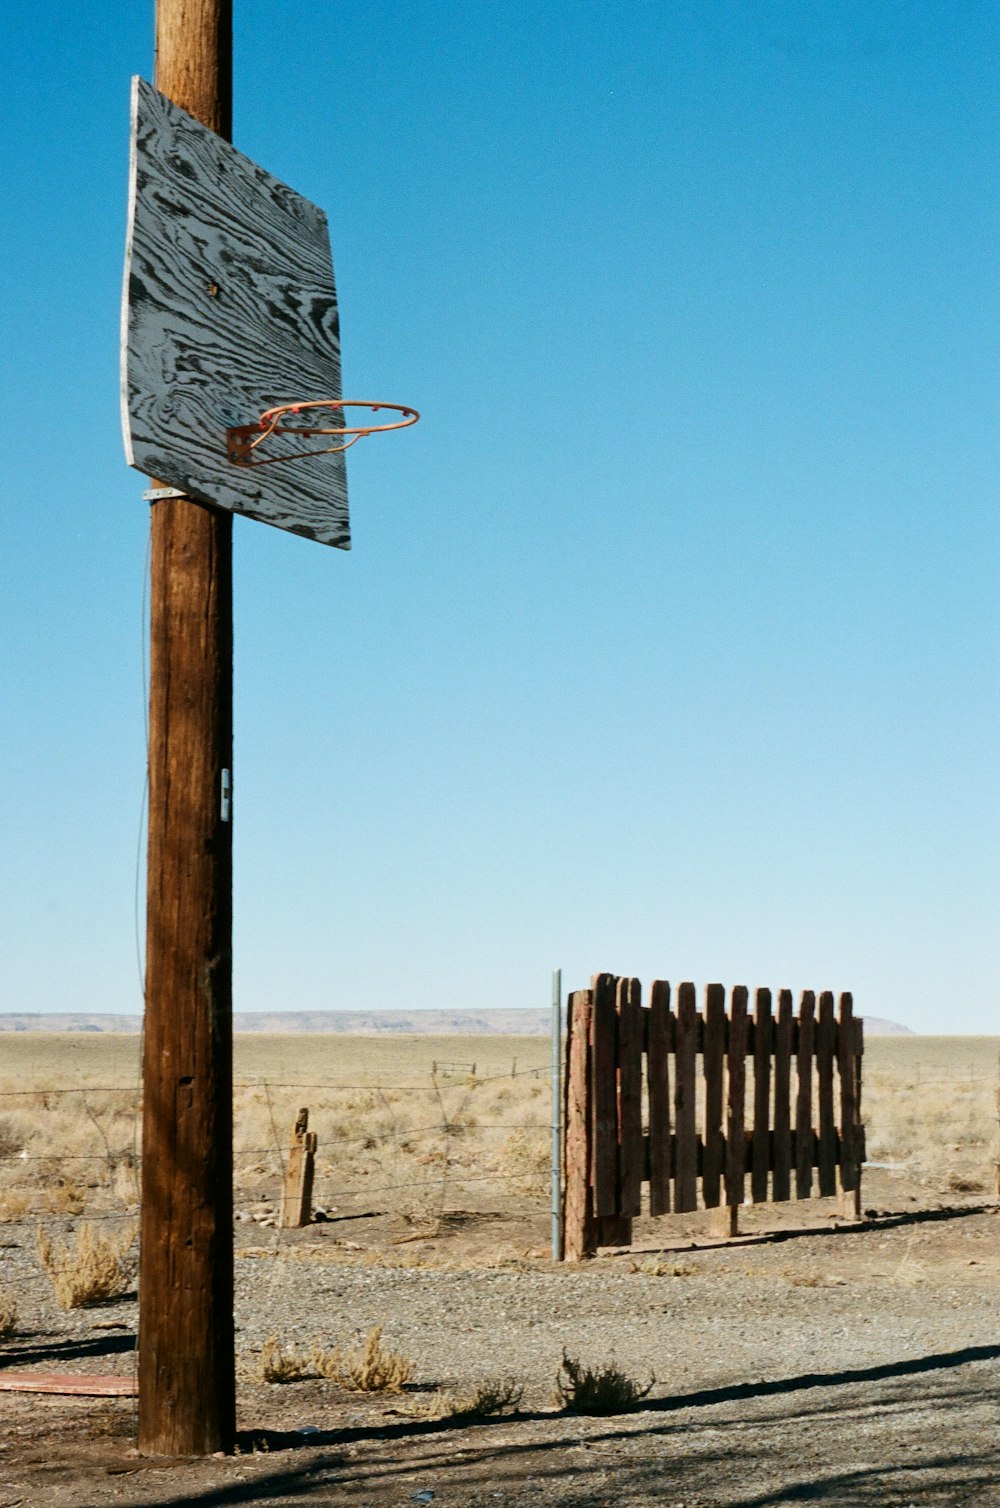 a wooden pole with a basketball hoop attached to it